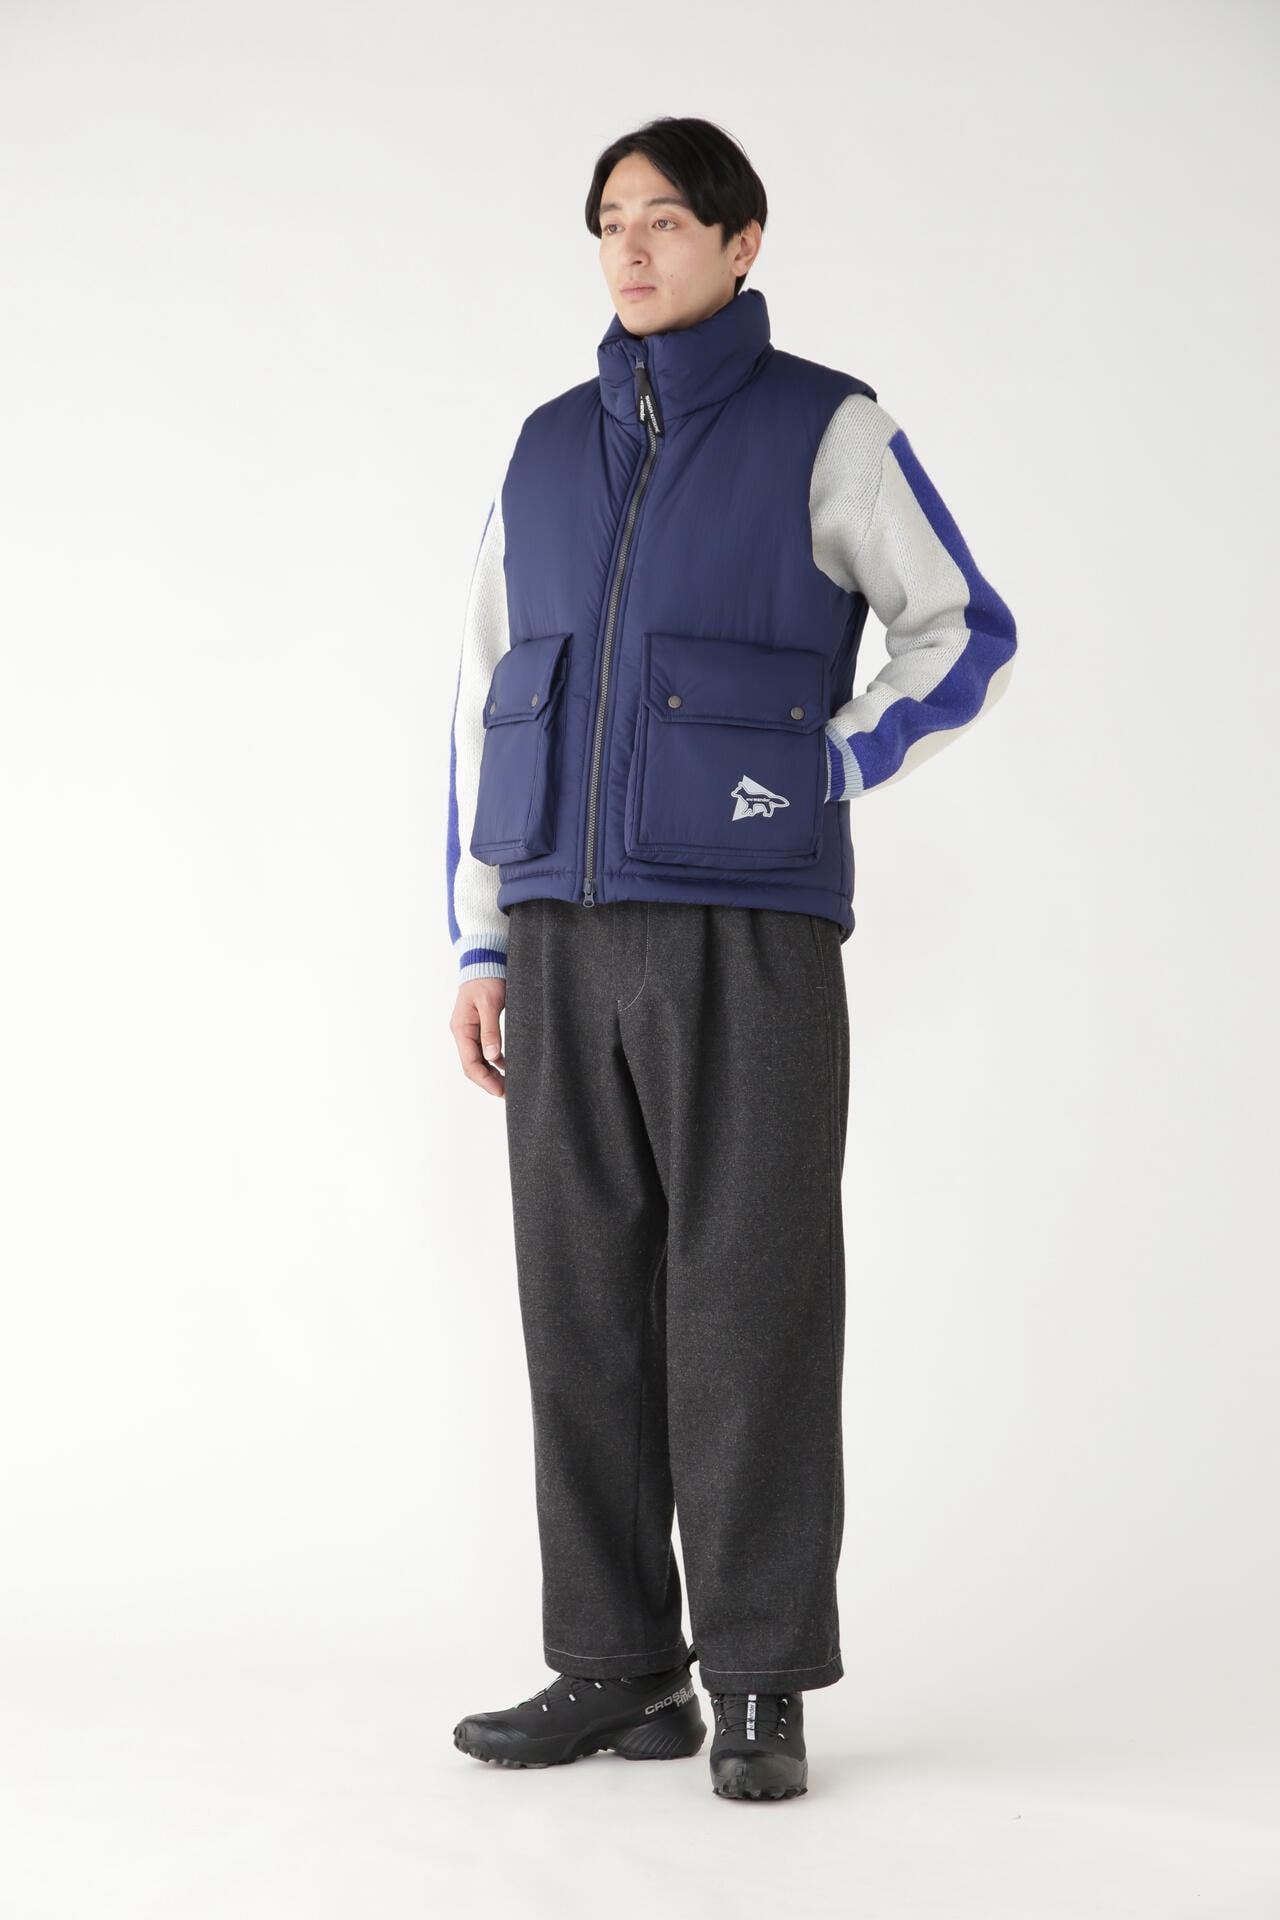 MAISON KITSUNÉ × and wander insulation vest | outerwear | and 